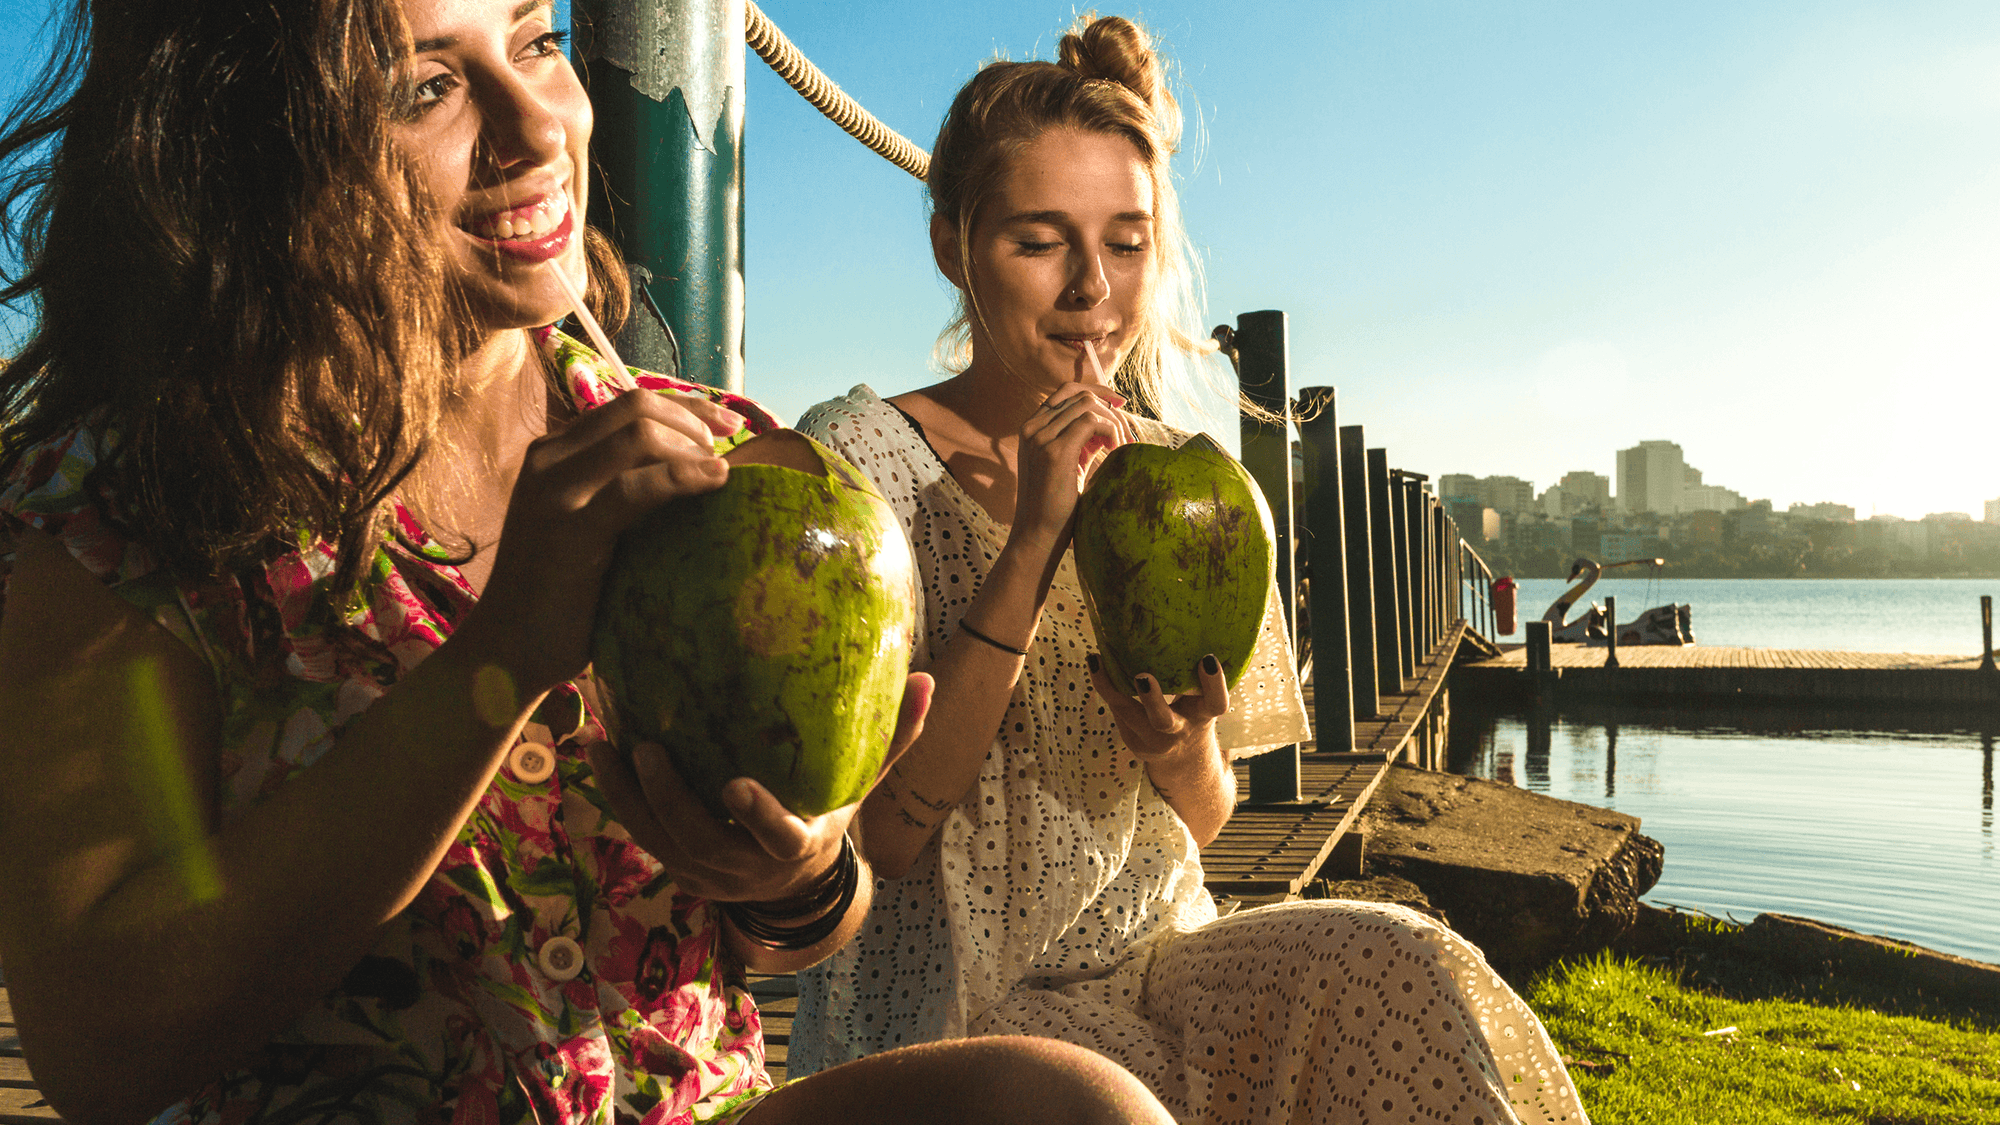 Two women drinking coconut water straight from the coconut